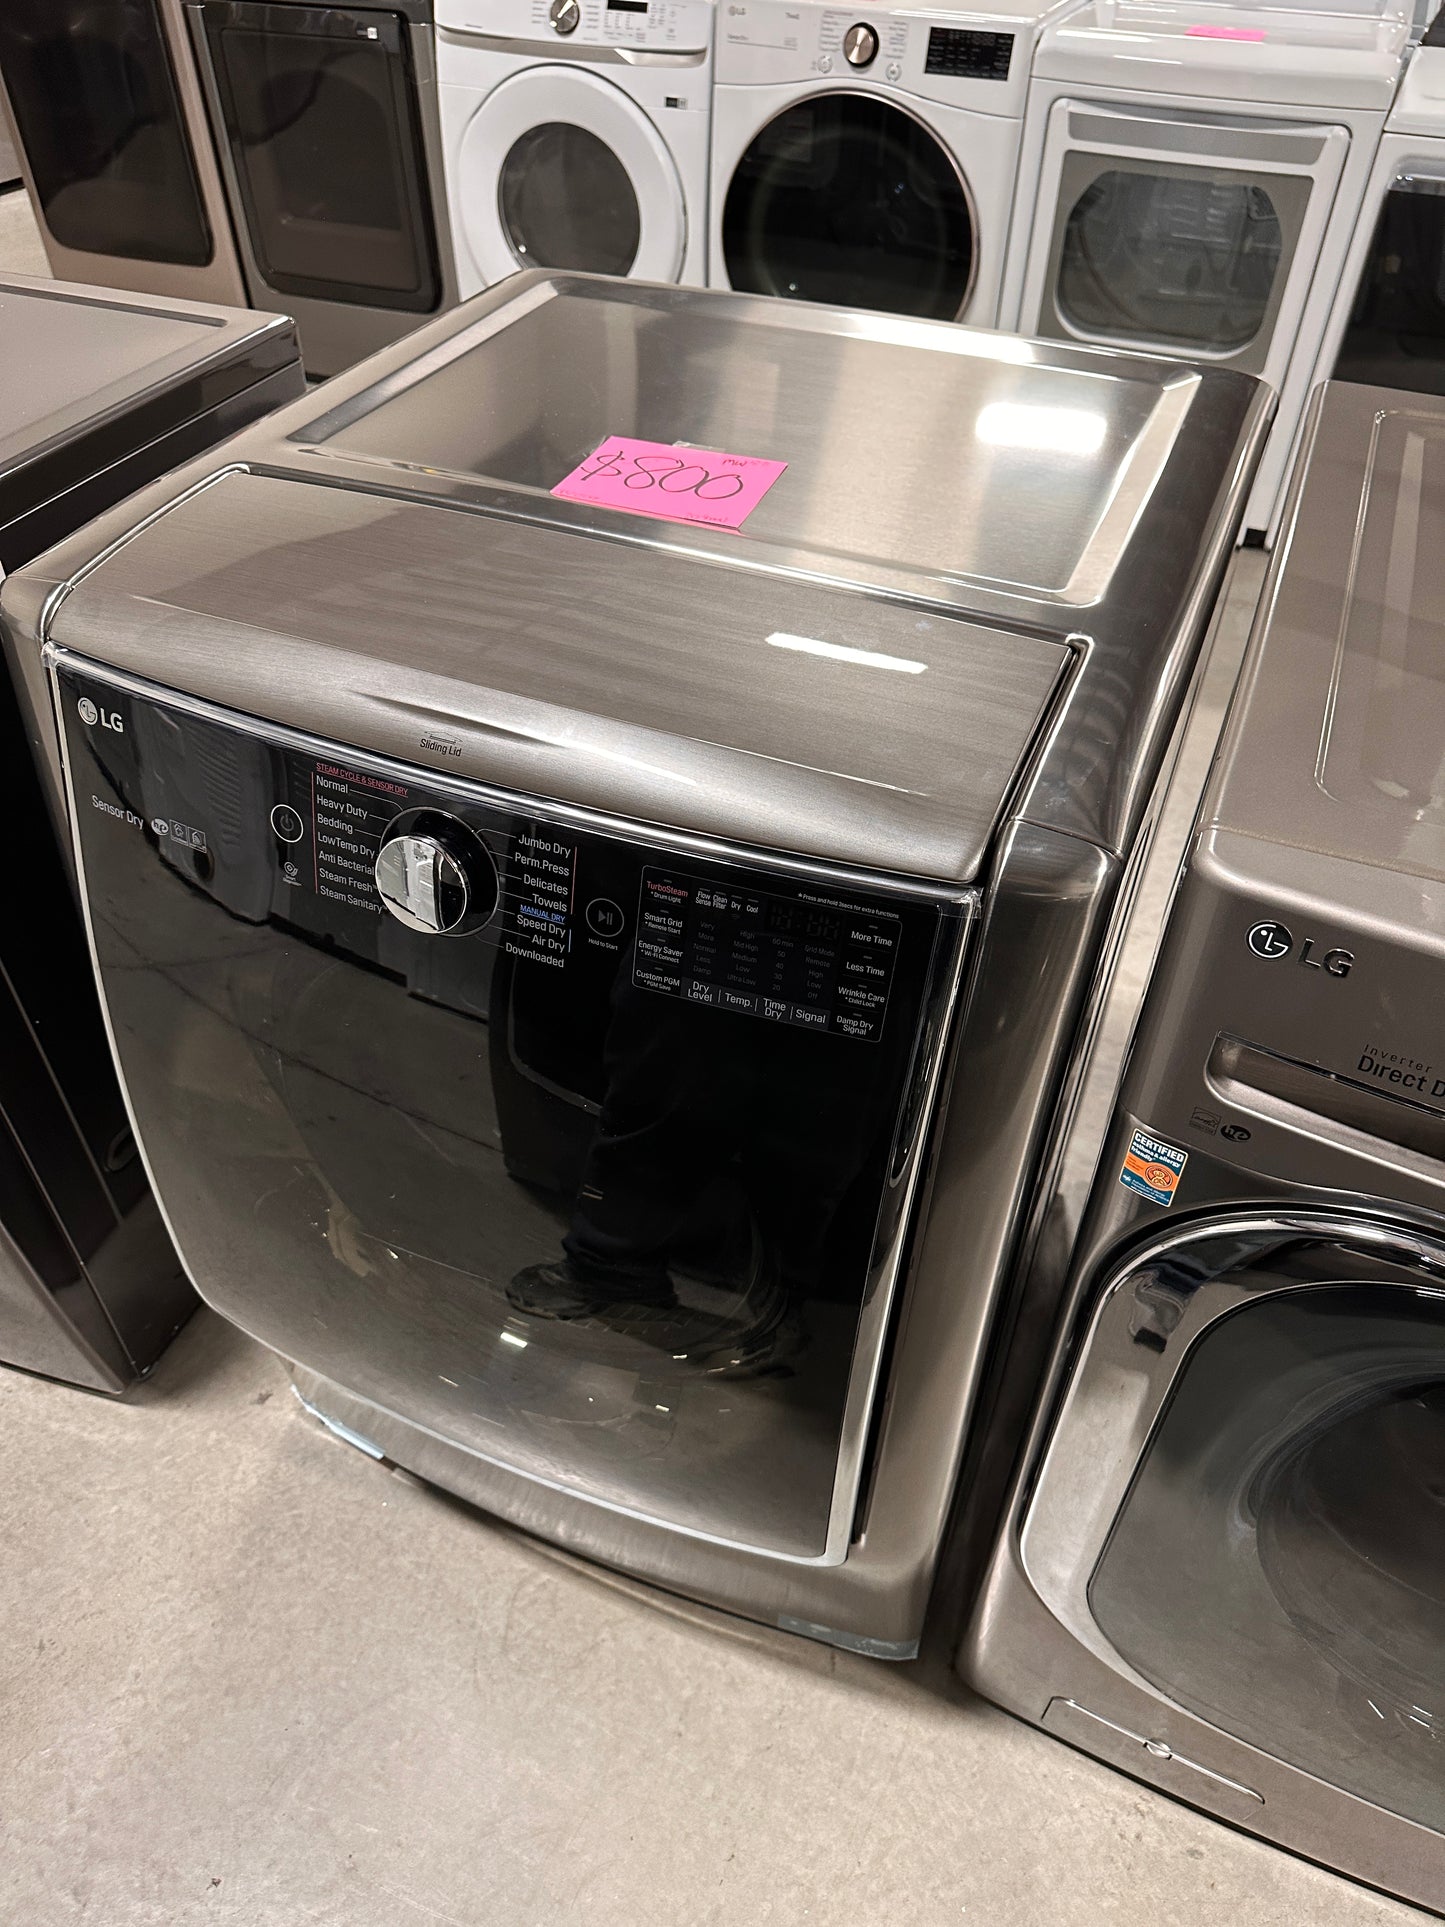 NEW IN BOX LG ELECTRIC DRYER - DRY12091